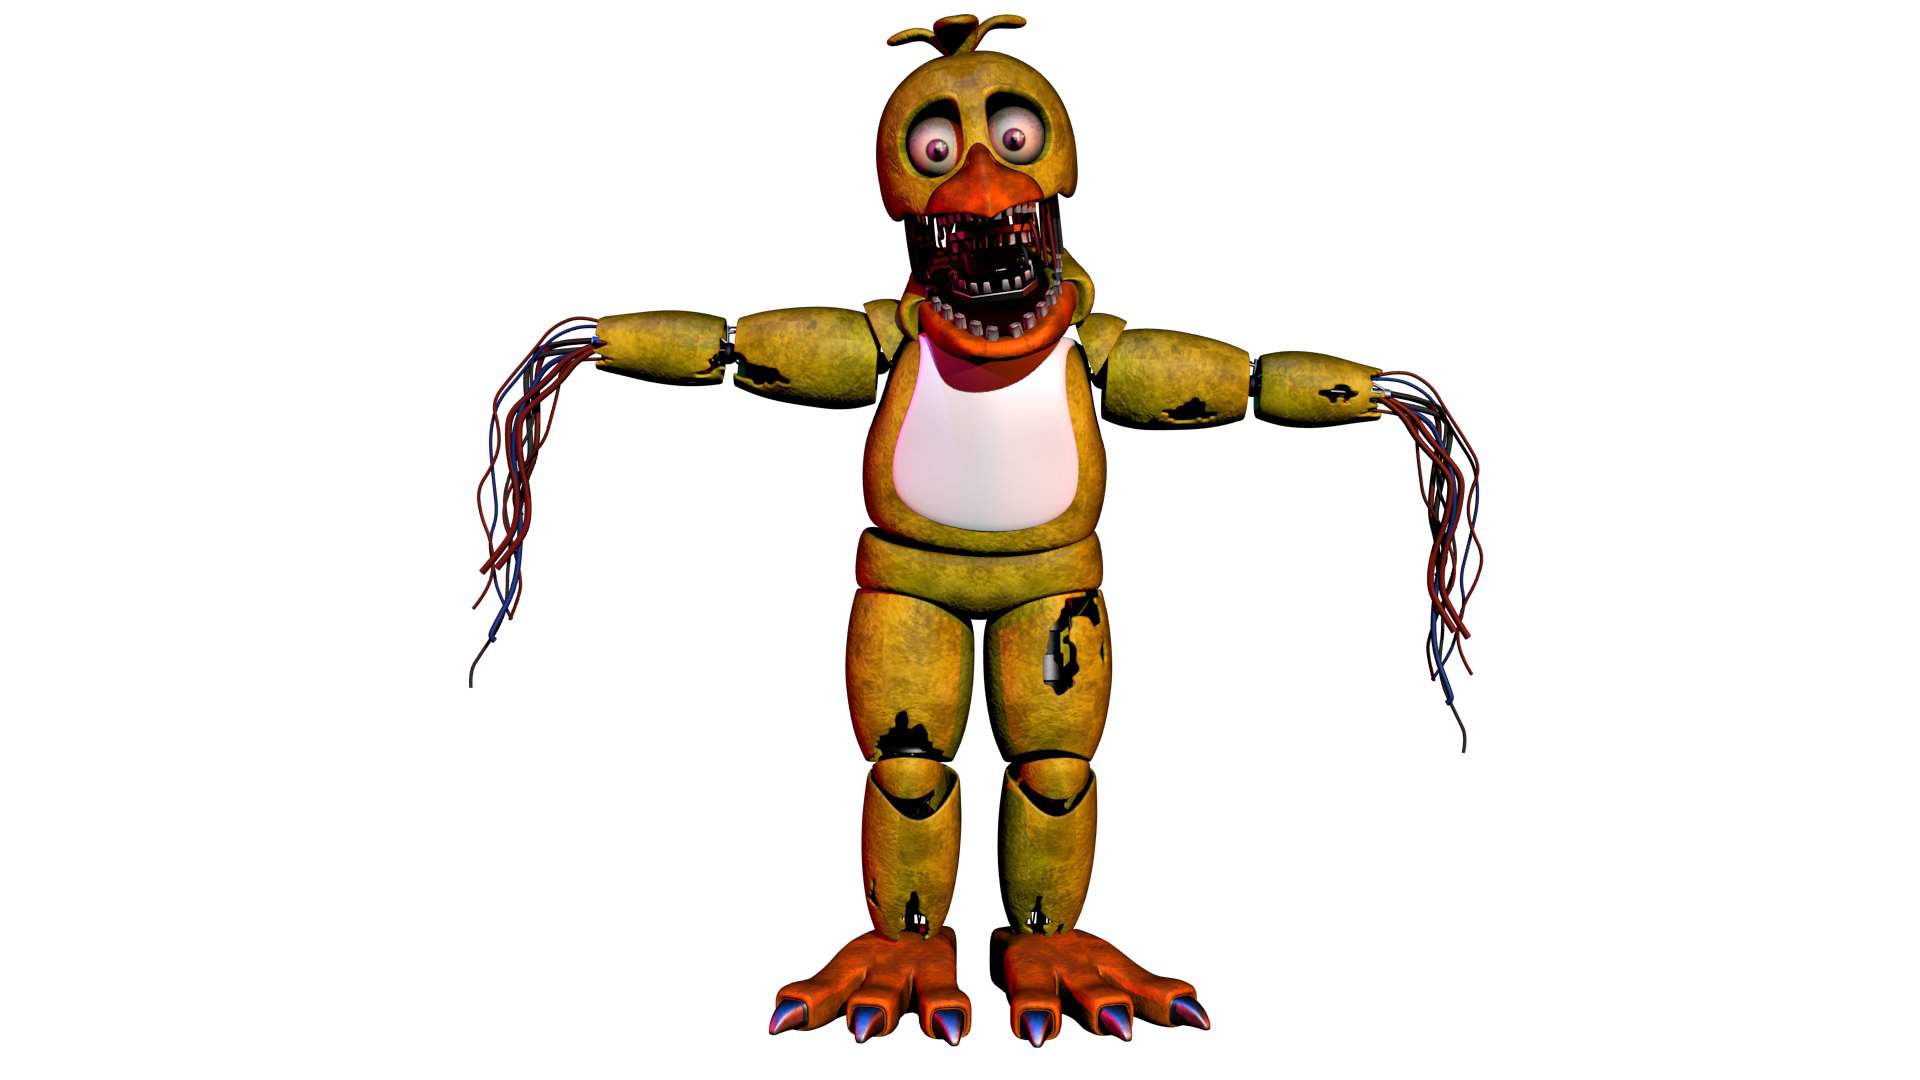 Why withered chica is doing the T pose? 